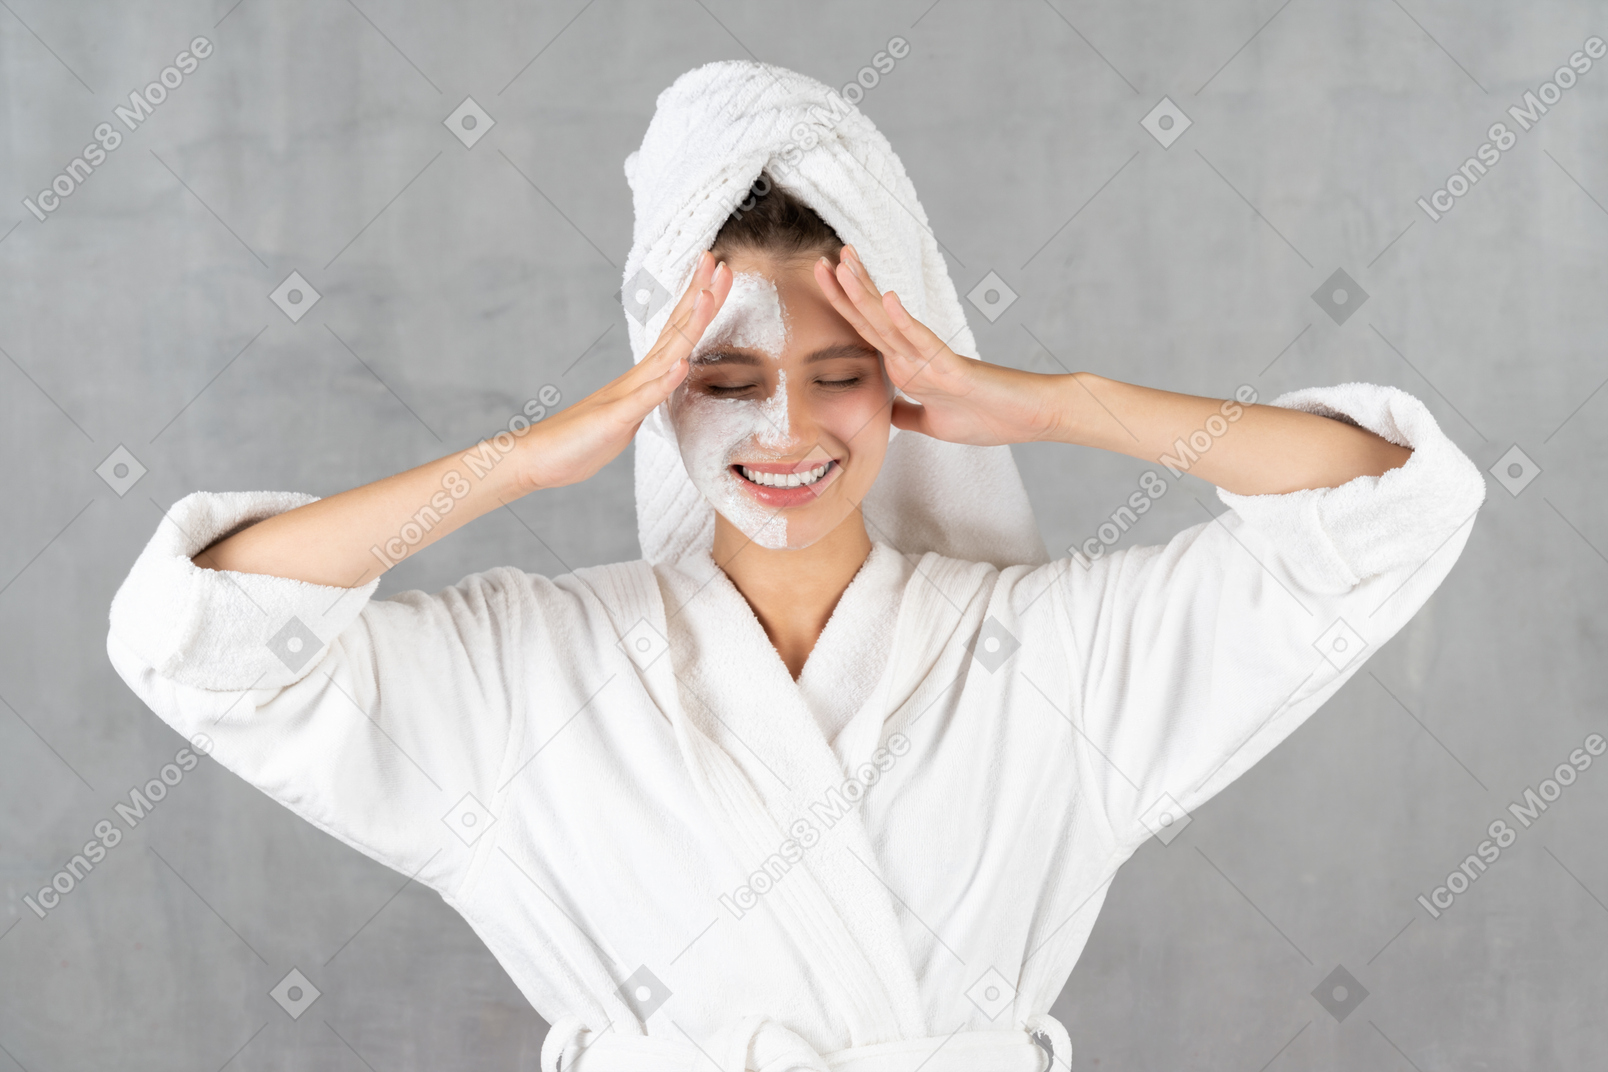 Woman in bathrobe smiling and touching temples